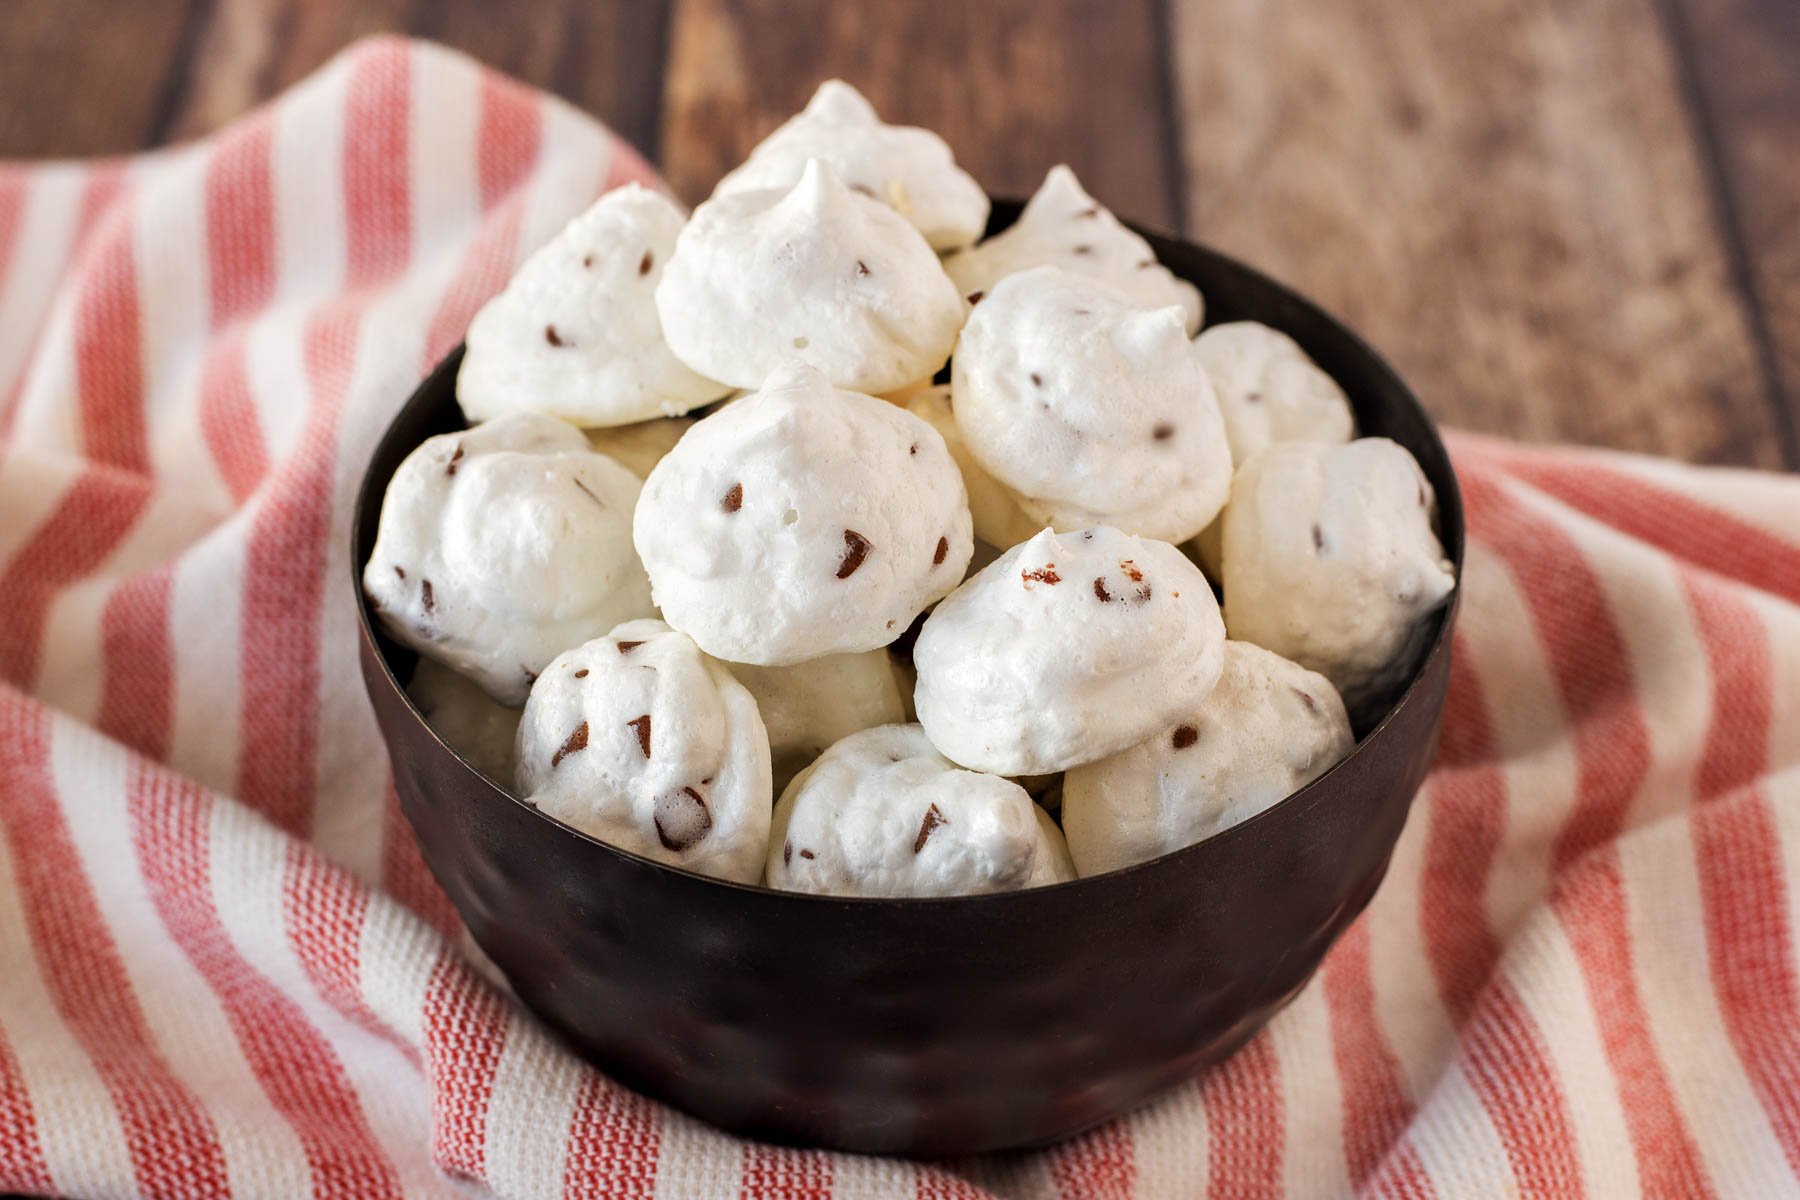 Mini chocolate chip meringue cookies in a bowl on a striped tea towel.